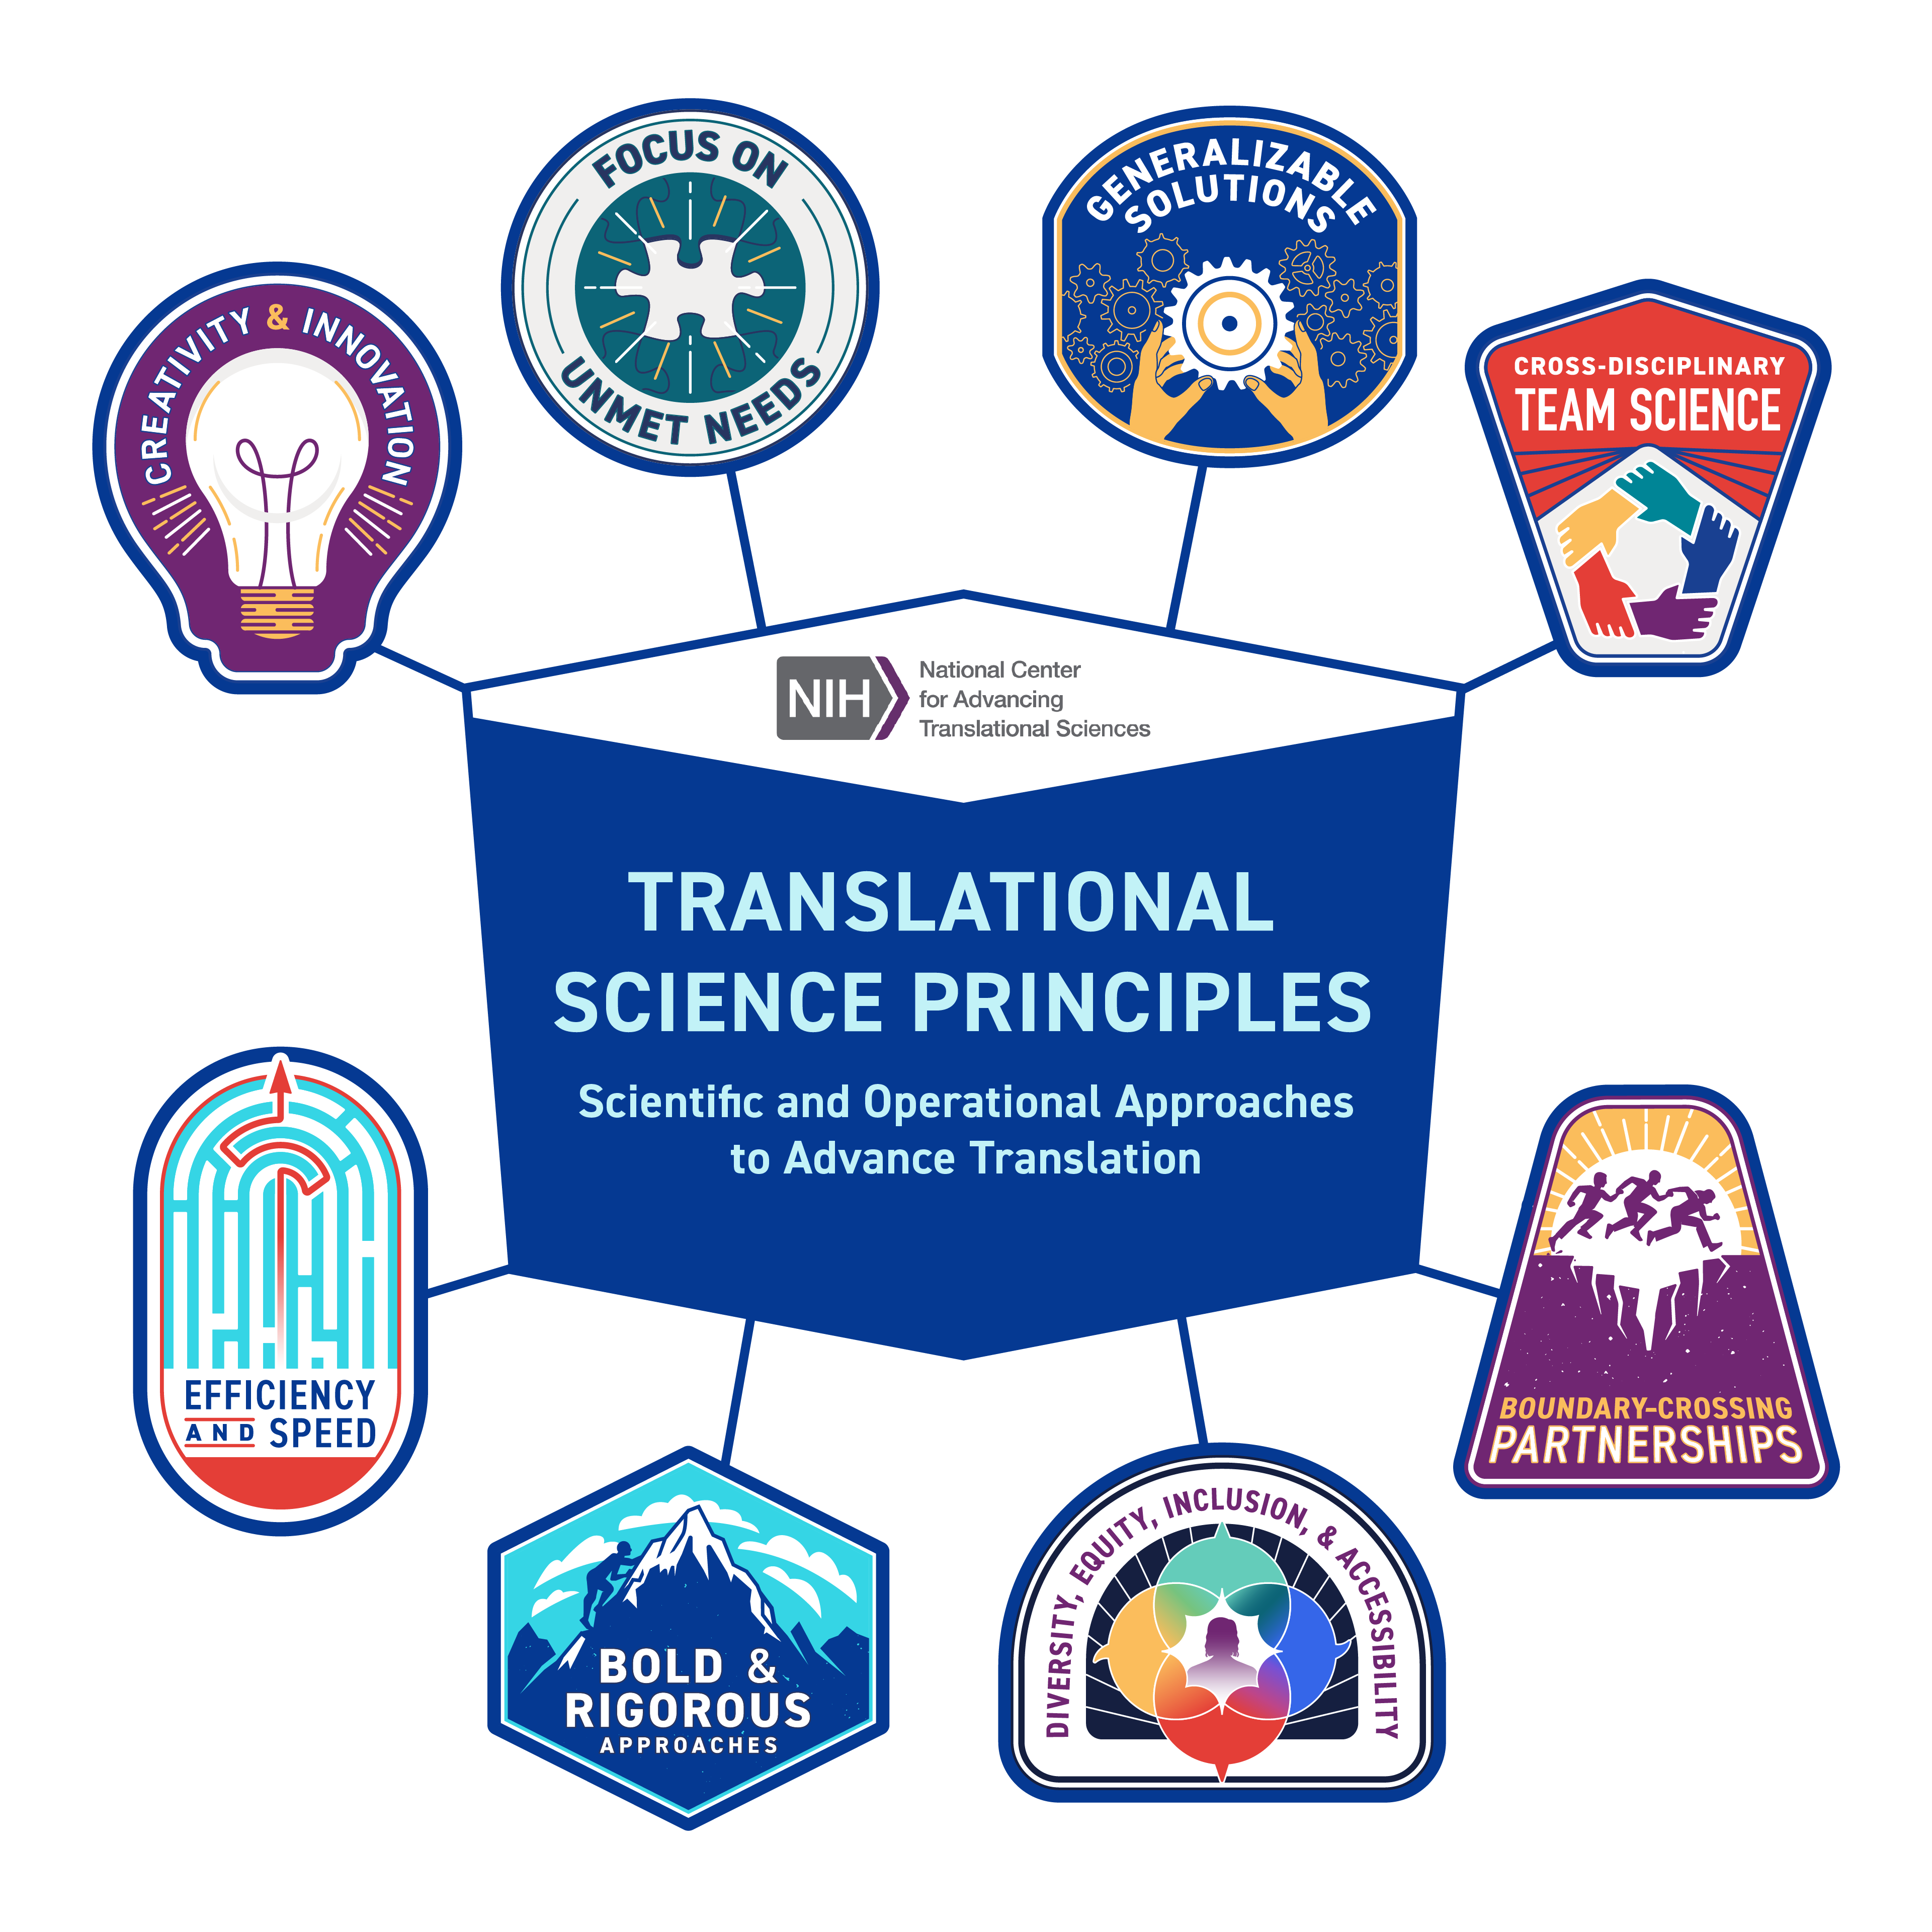 NCATS Translational Science Principles overview